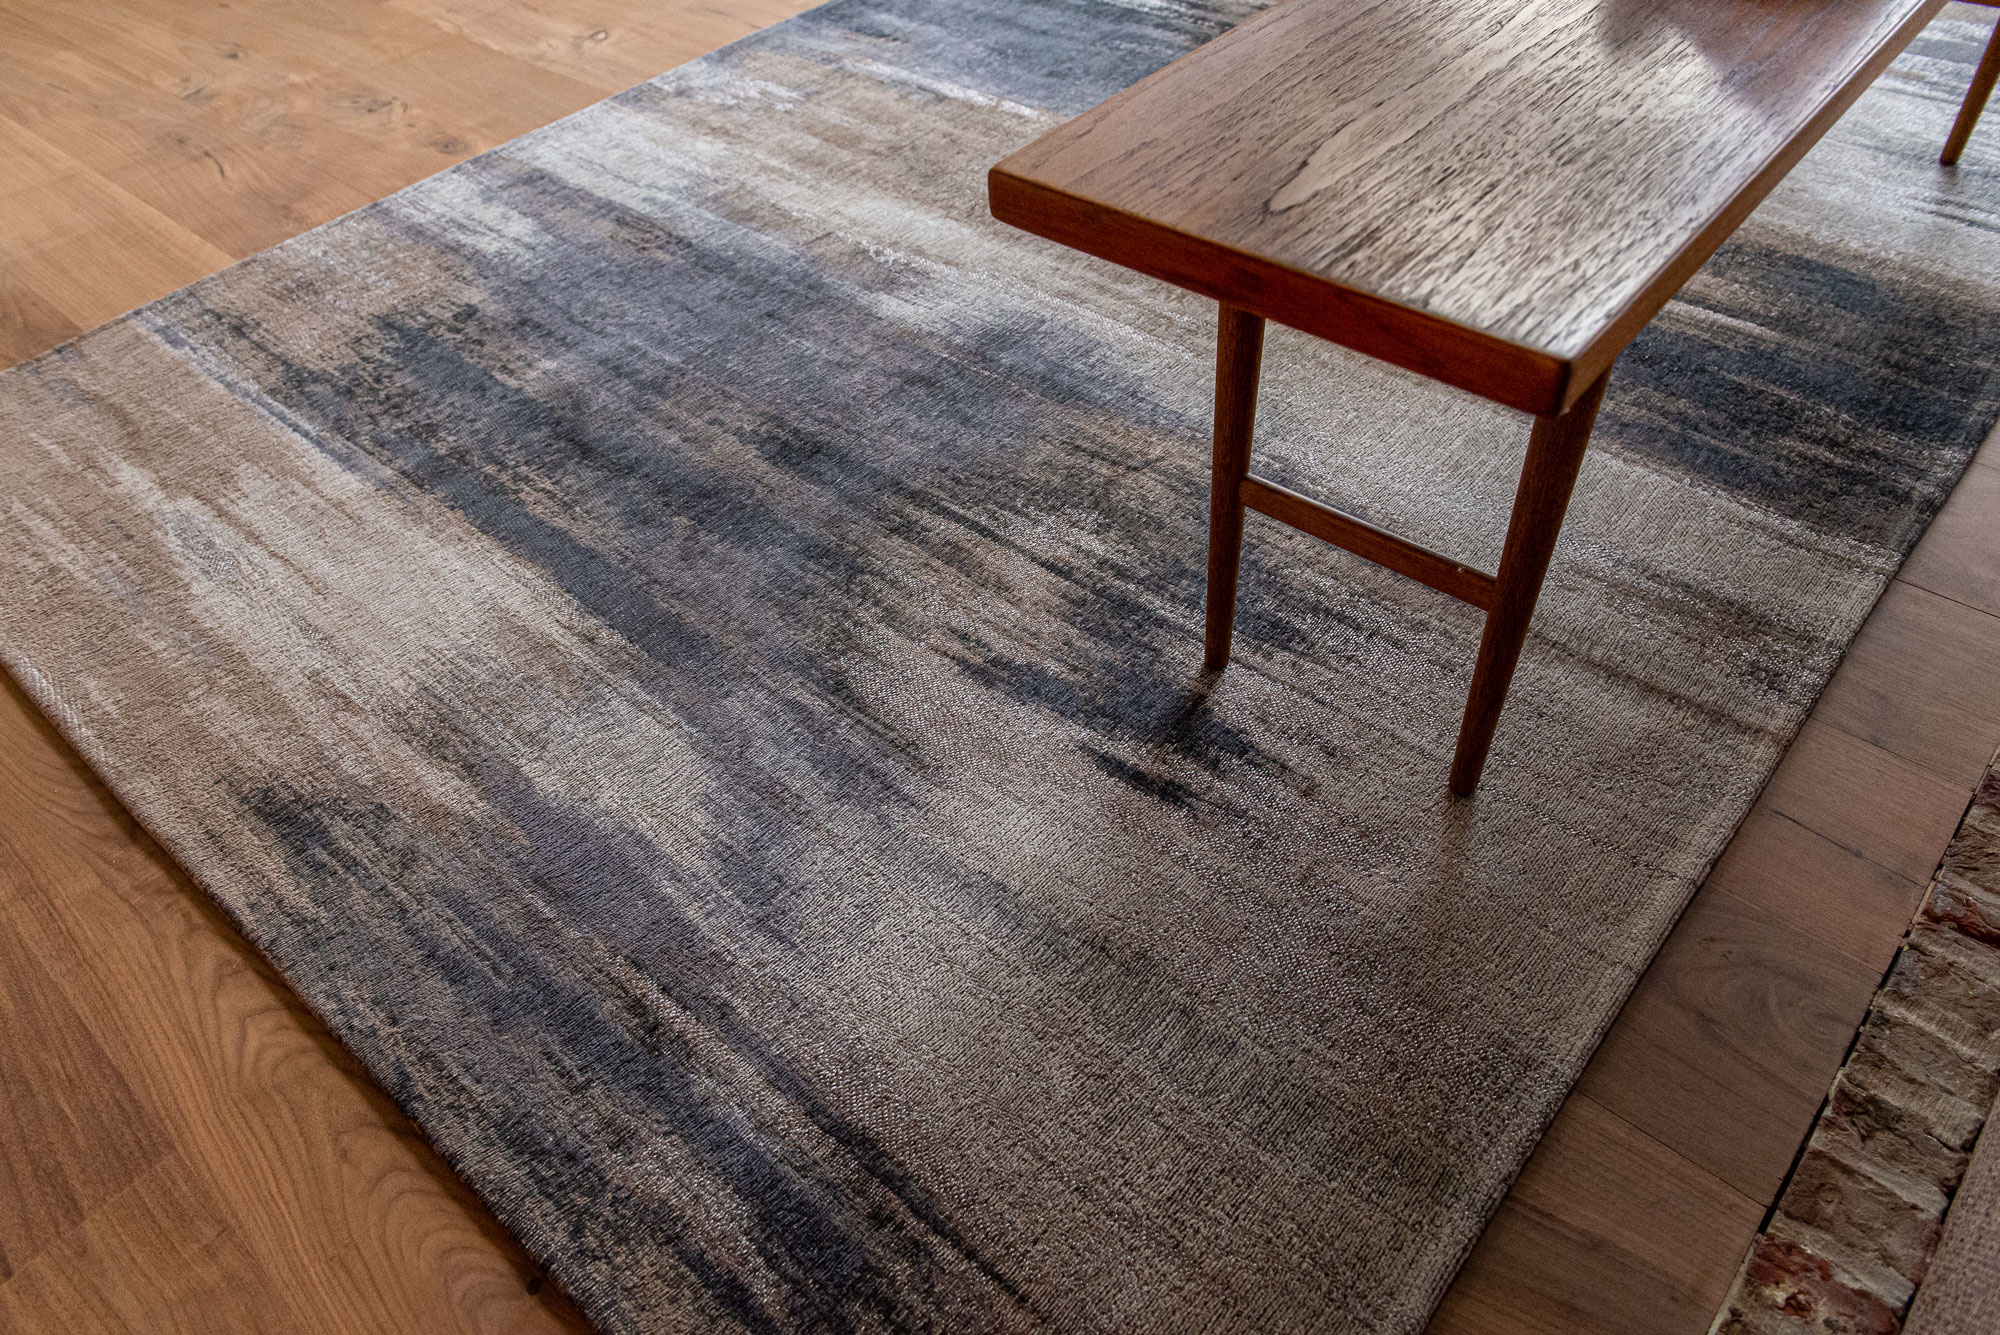 Abstract Flatwoven Beige Rug ☞ Size: 6' 7" x 9' 2" (200 x 280 cm)